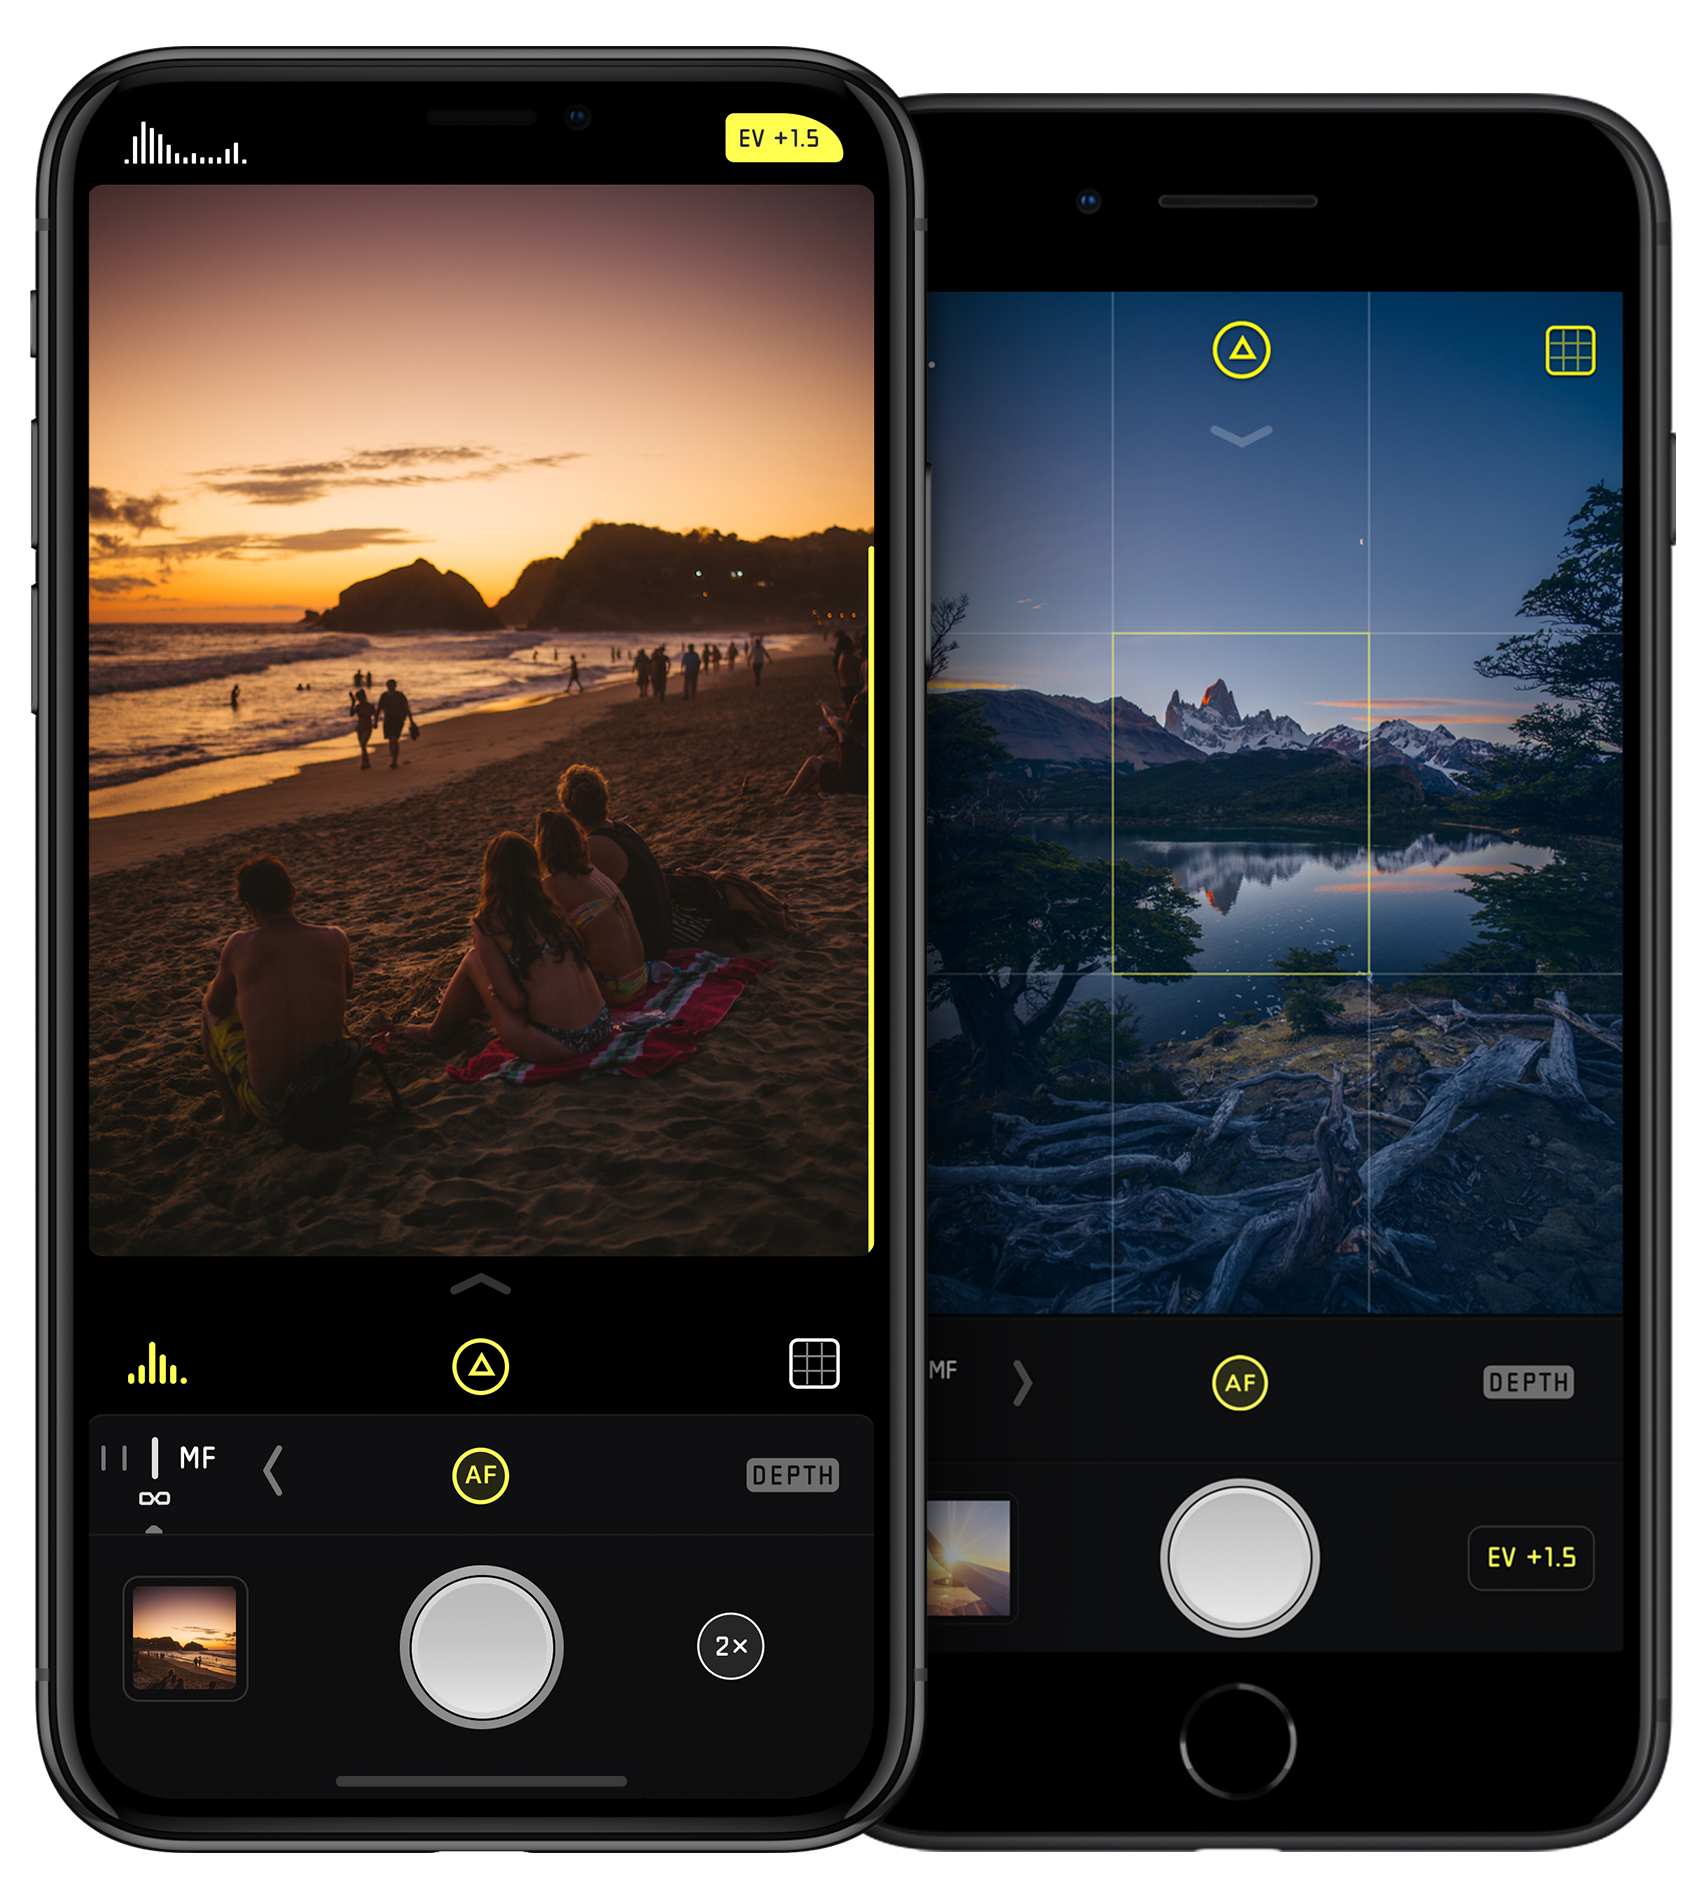 Halide 1.5: A camera app made for iPhone X - Halide